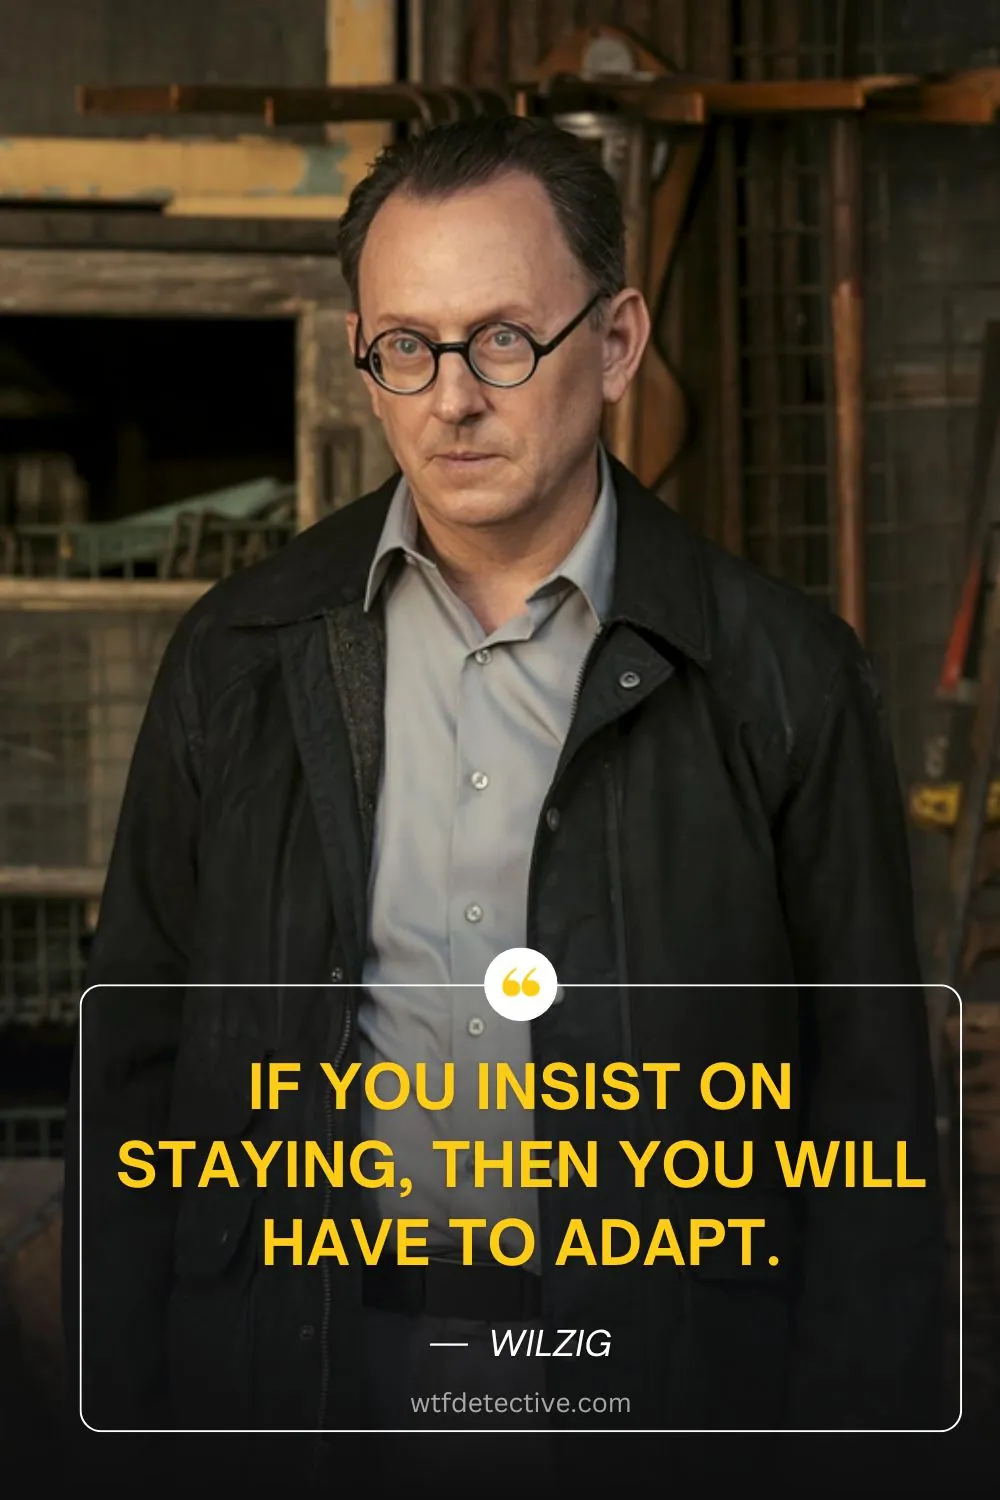 If you insist on staying, then you will have to adapt quote, wilzig quotes from fallout 2024 series, Michael Emerson in Fallout (2024), fallout 2024 series quotes